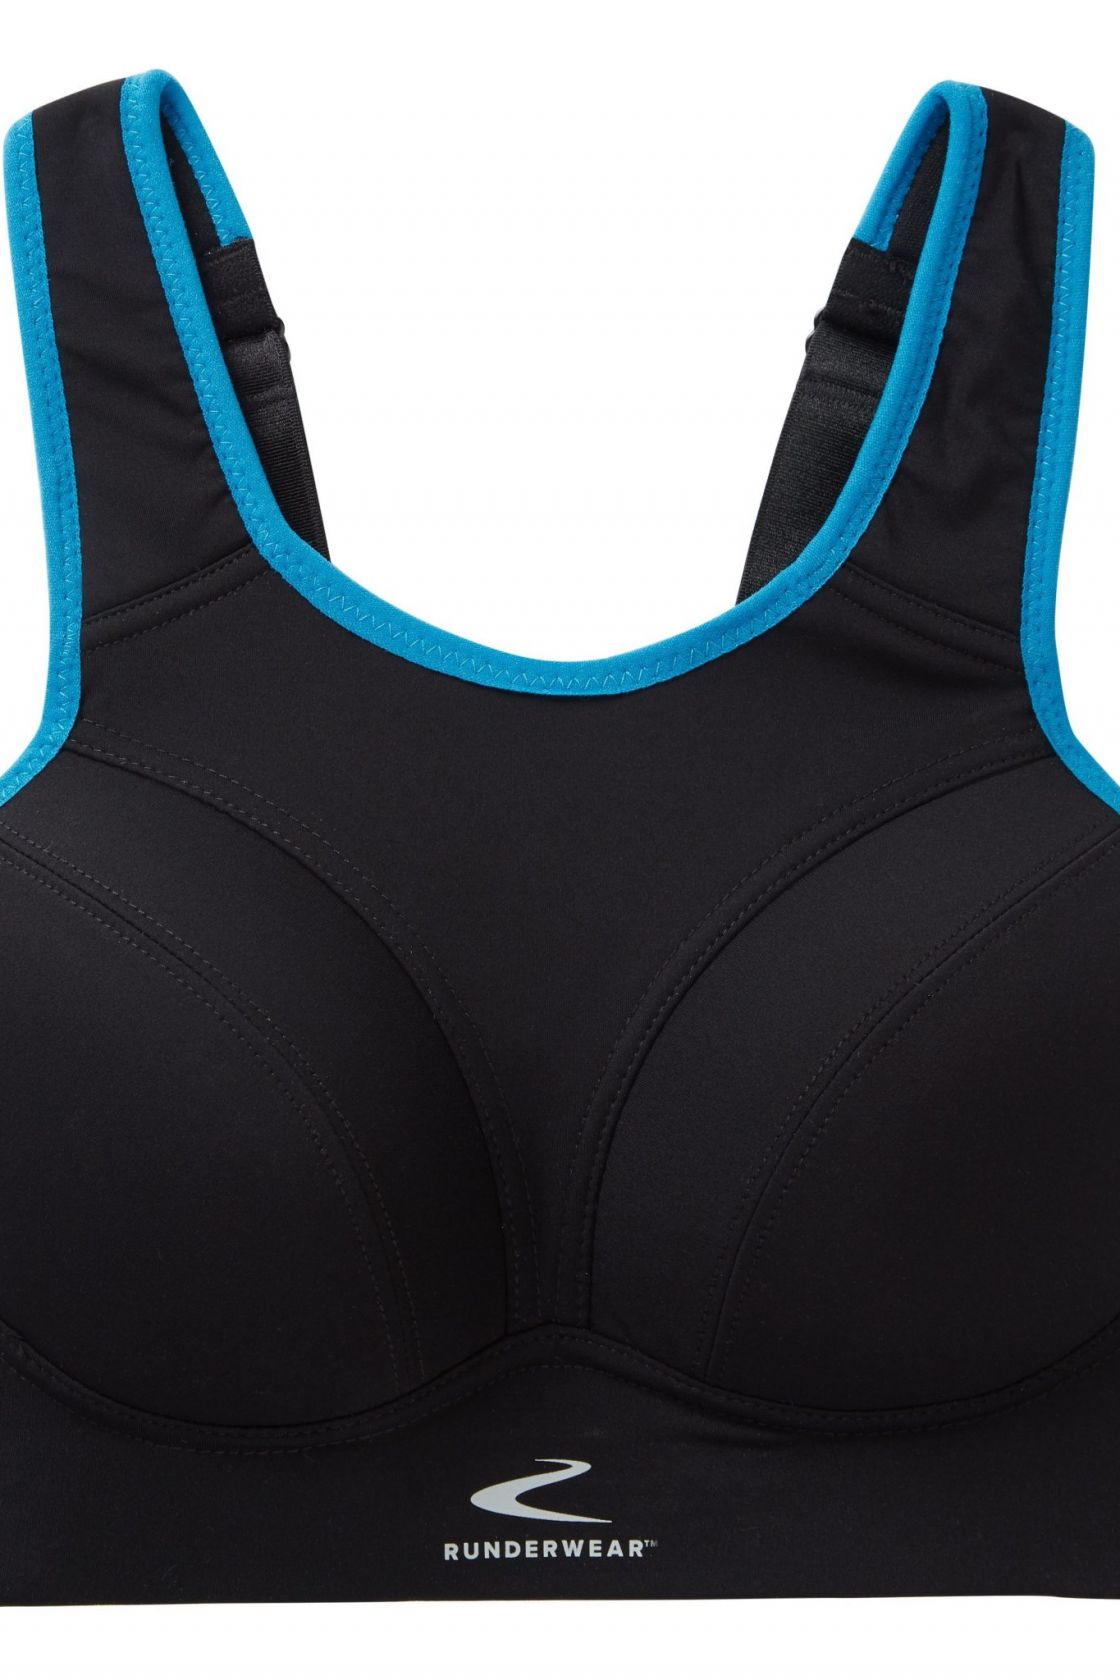 MAAREE teams up with CoppaFeel! to release a new sports bra - Women's  Running